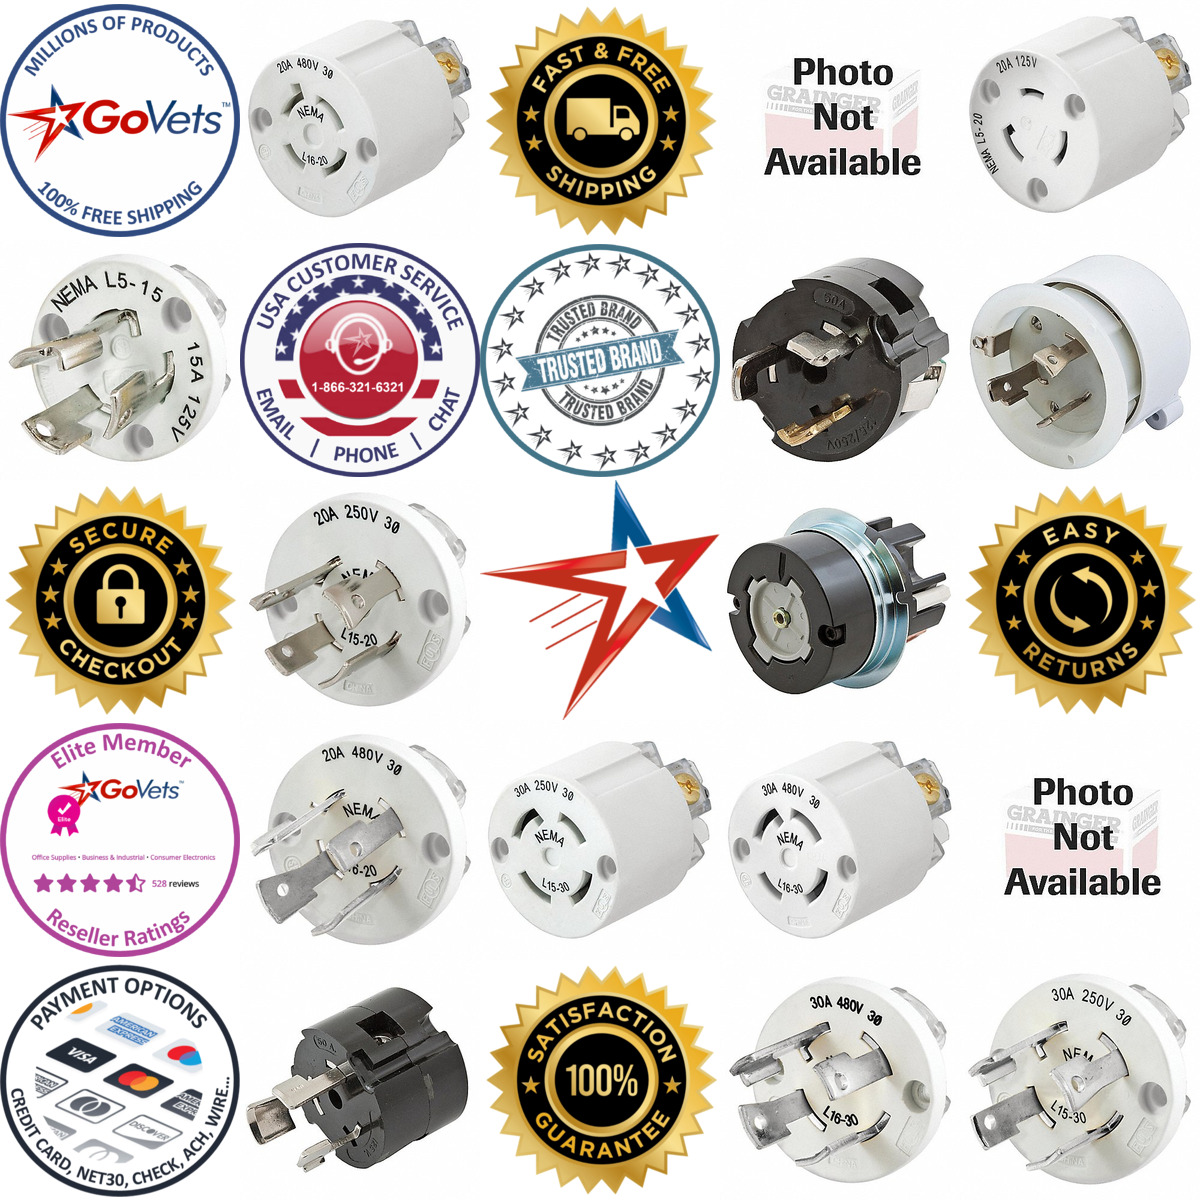 A selection of Locking Device Replacement Inserts products on GoVets